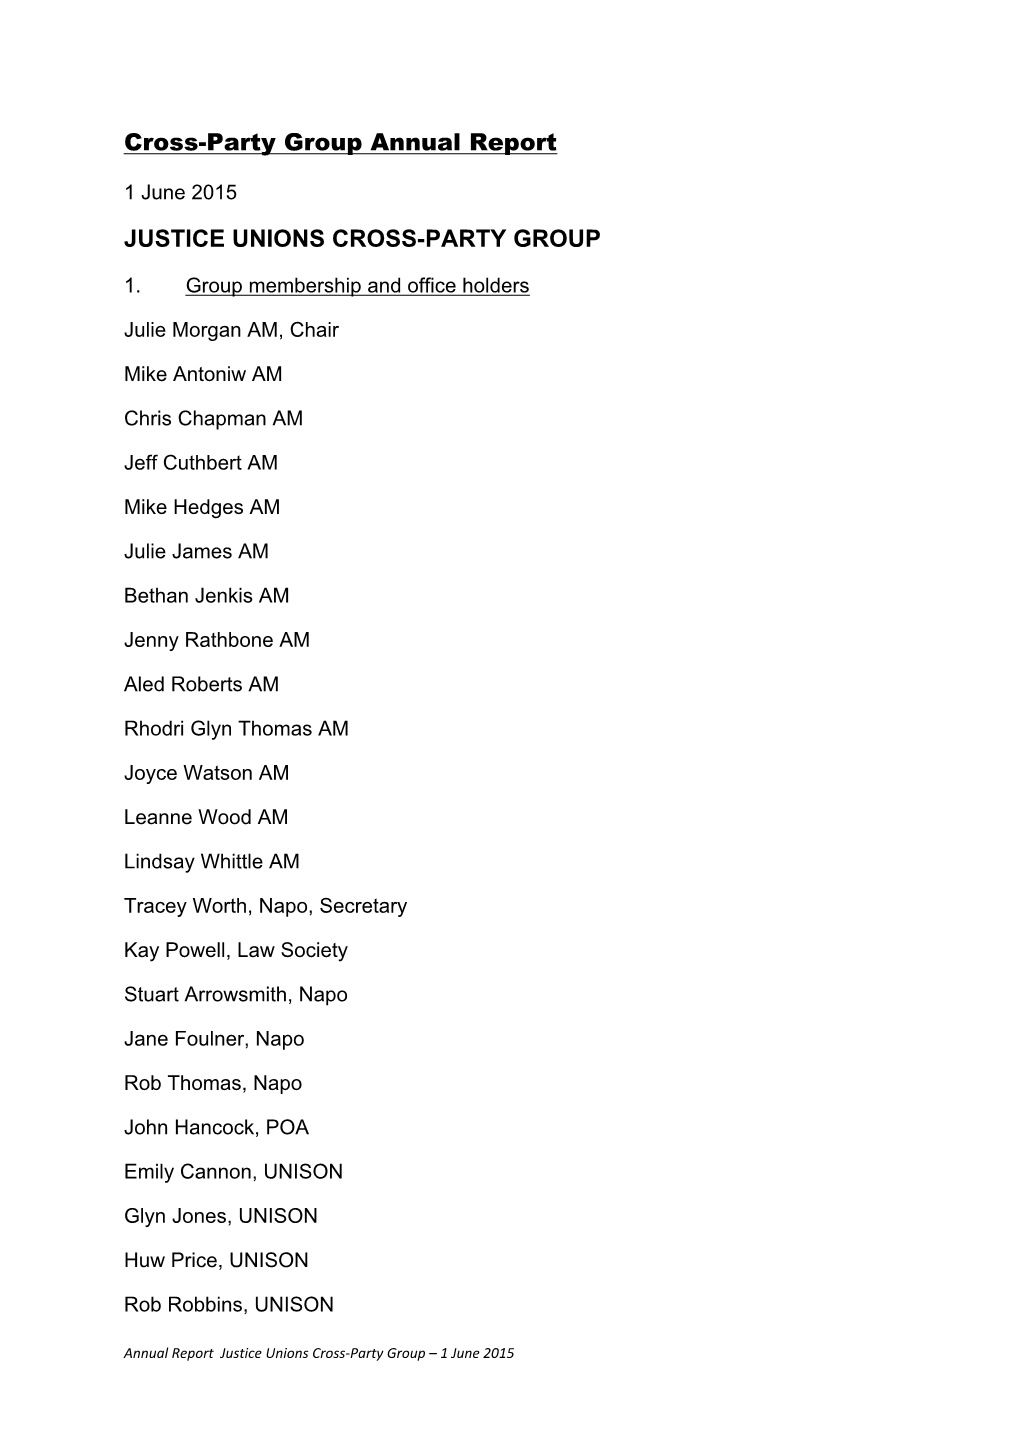 Cross-Party Group Annual Report JUSTICE UNIONS CROSS-PARTY